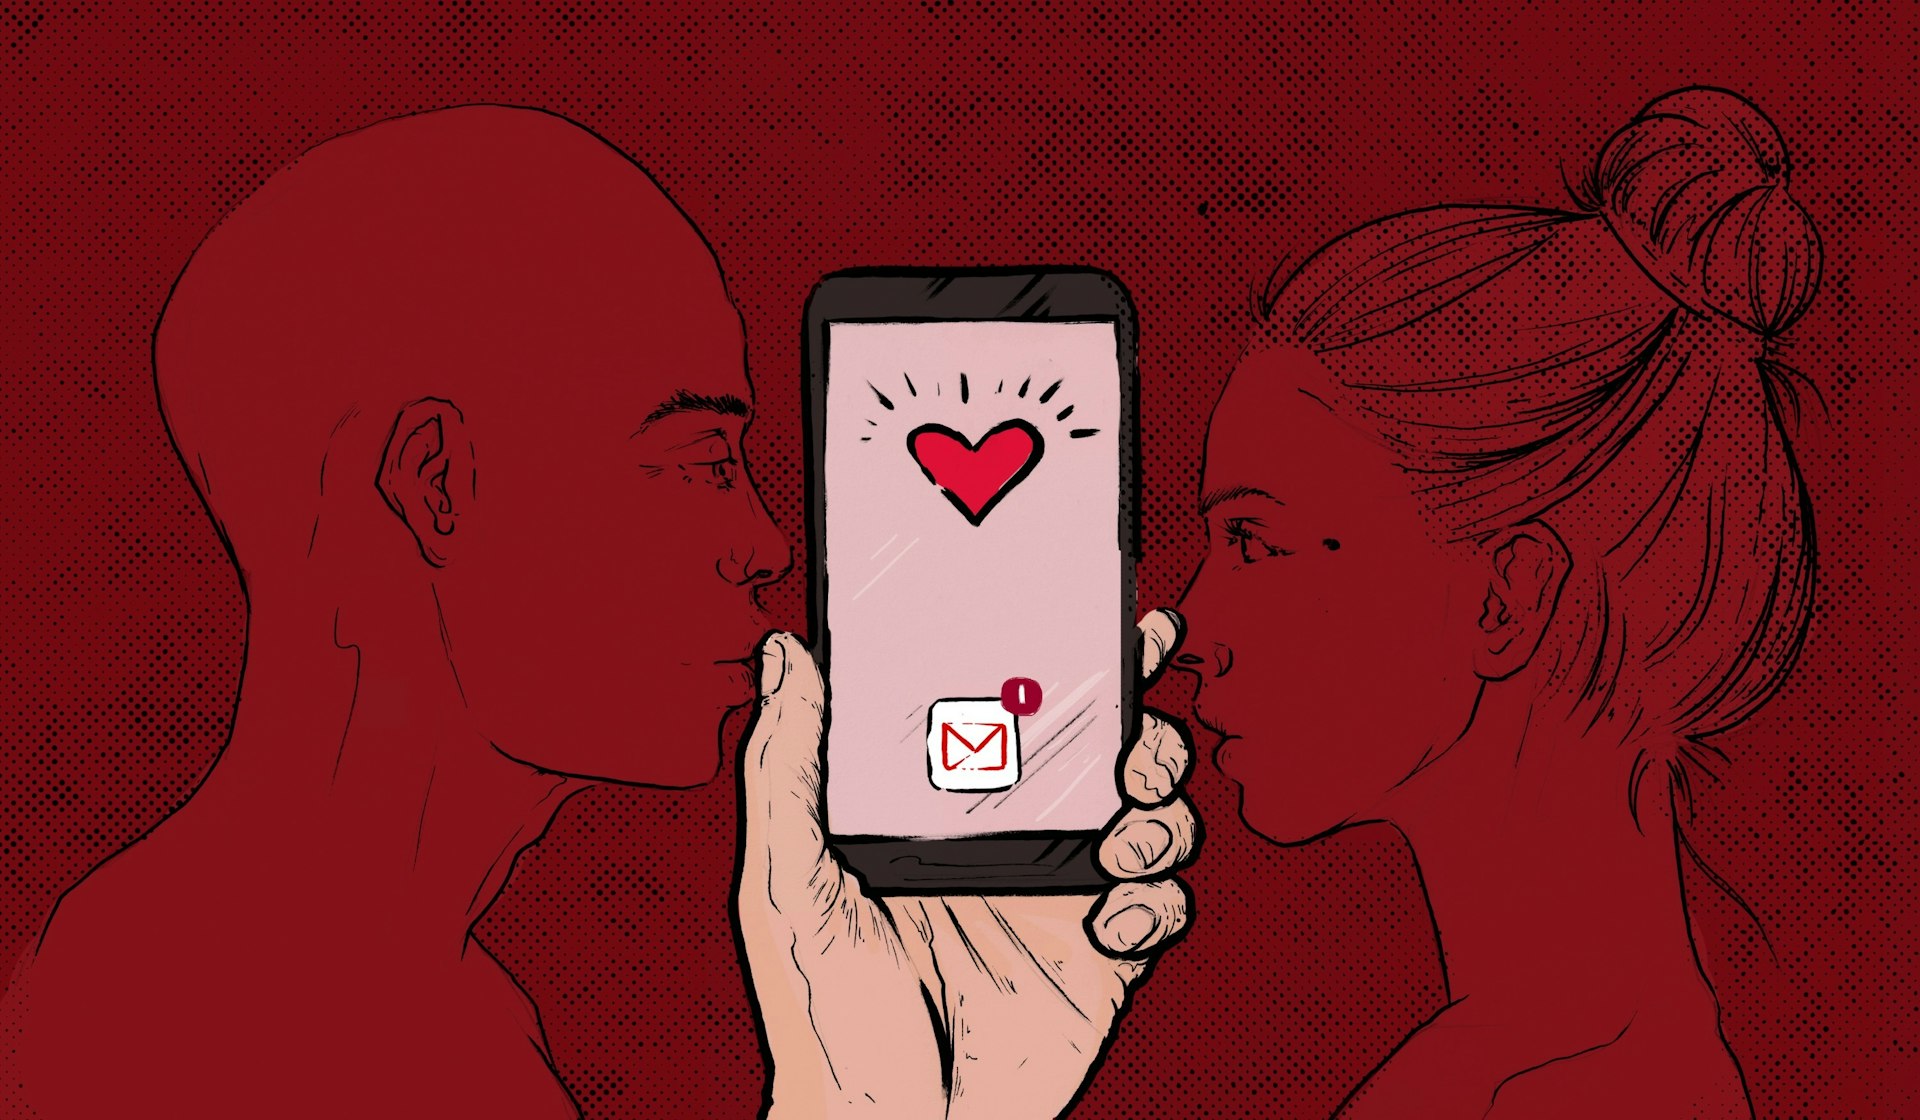 In the age of internet, no relationship is solely offline